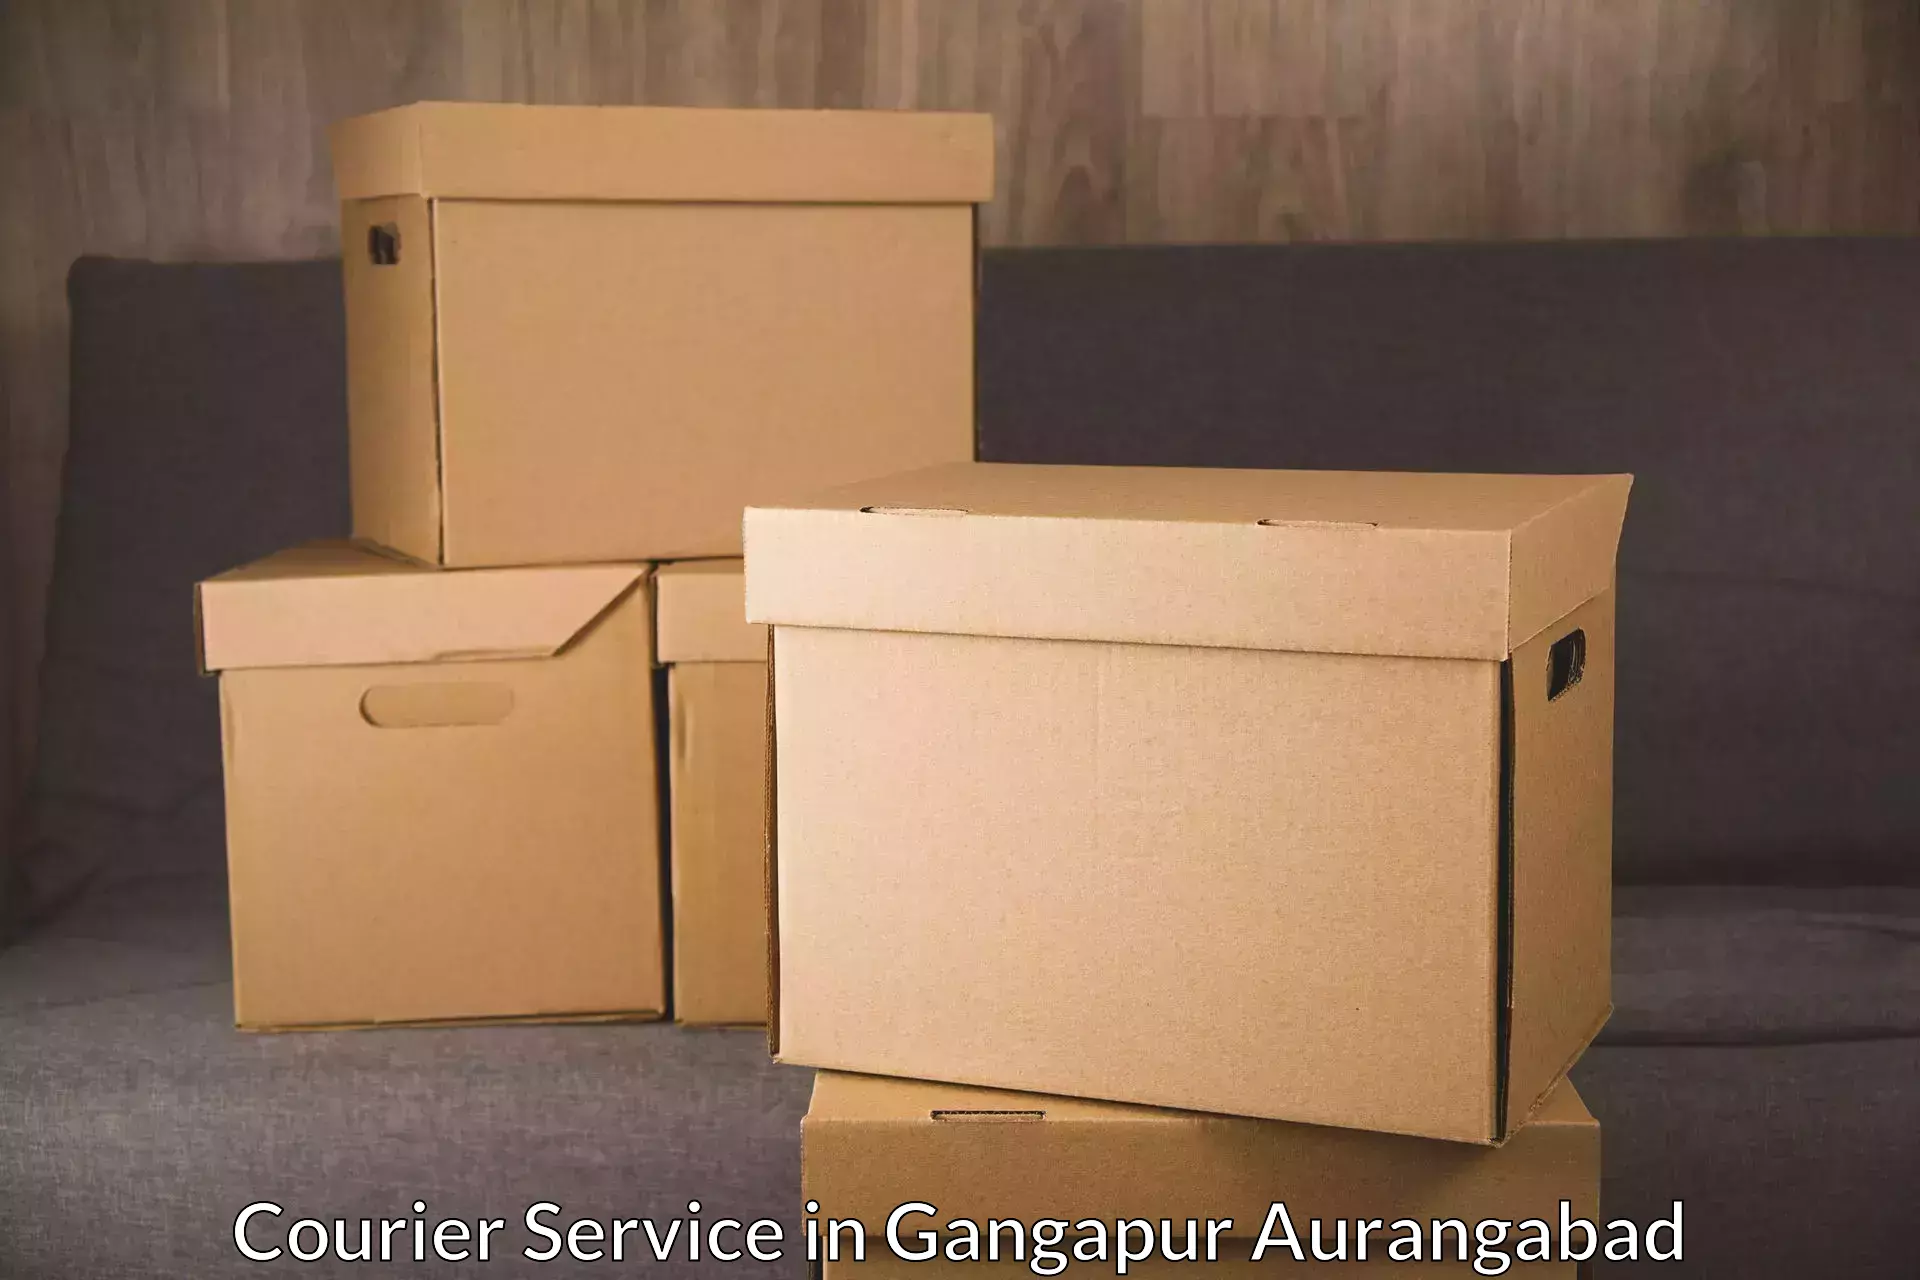 Overnight delivery services in Gangapur Aurangabad